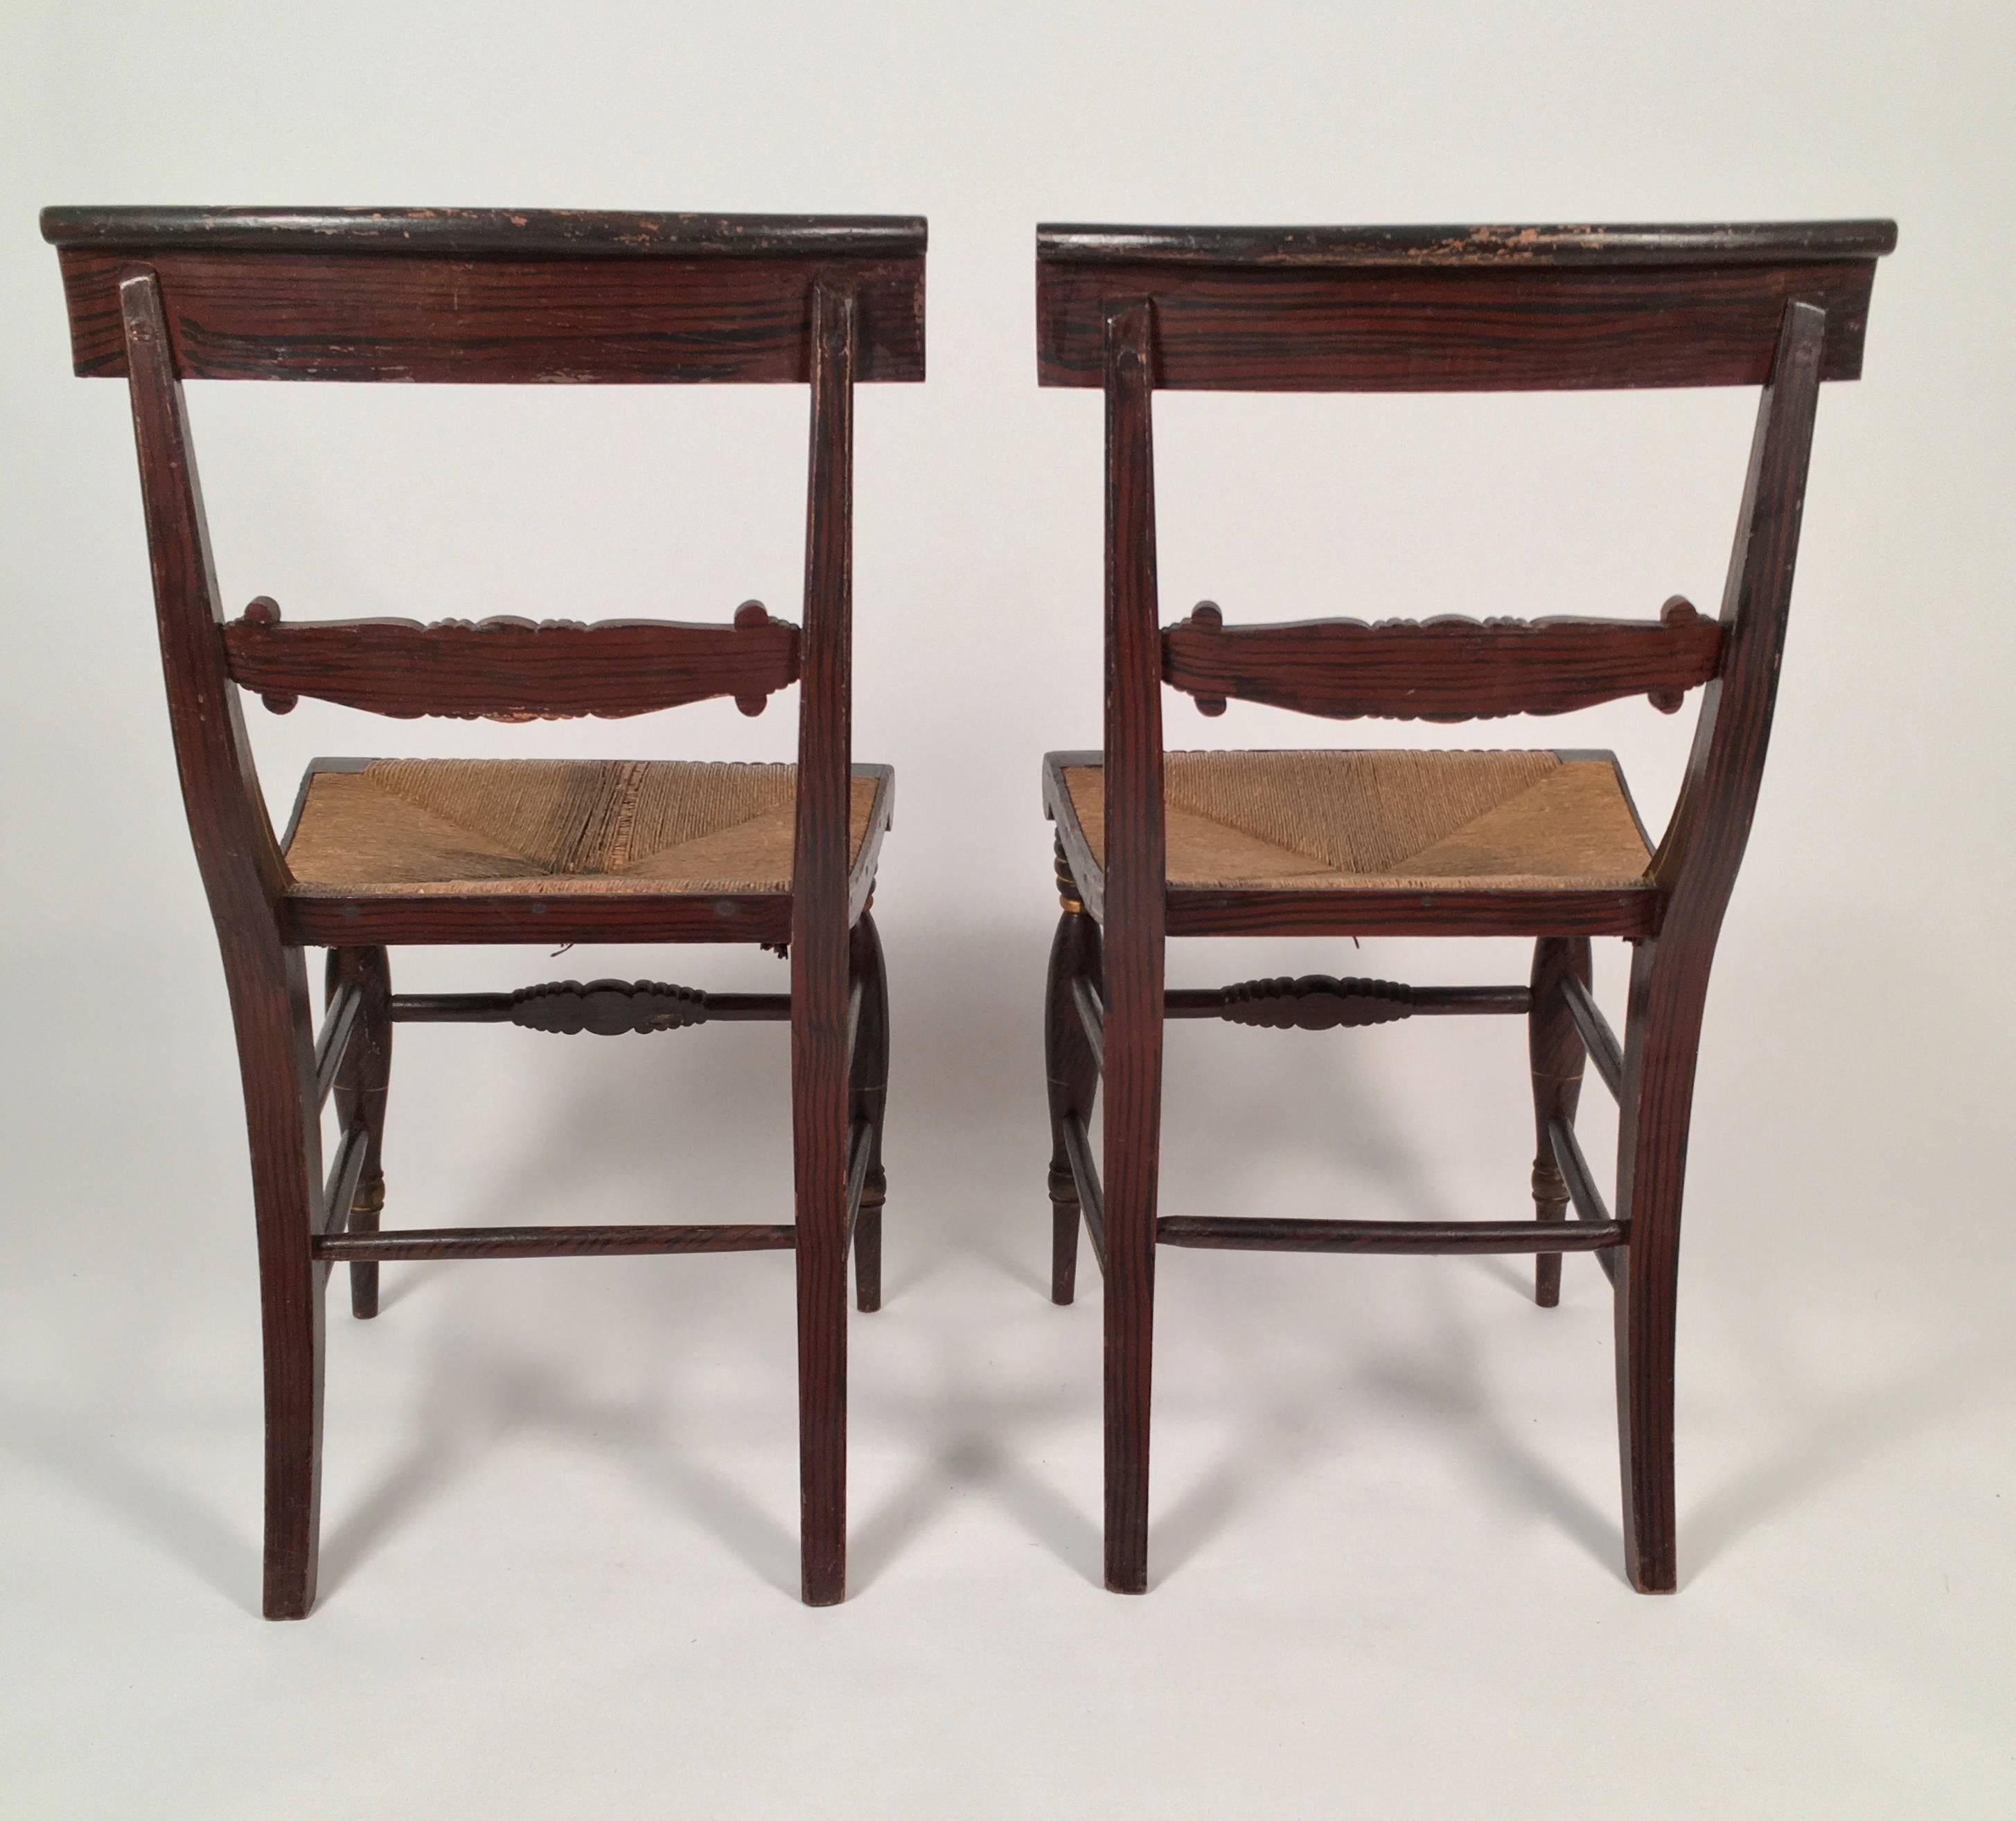 Carved Pair of Neoclassical Fancy Painted Klismos Chairs